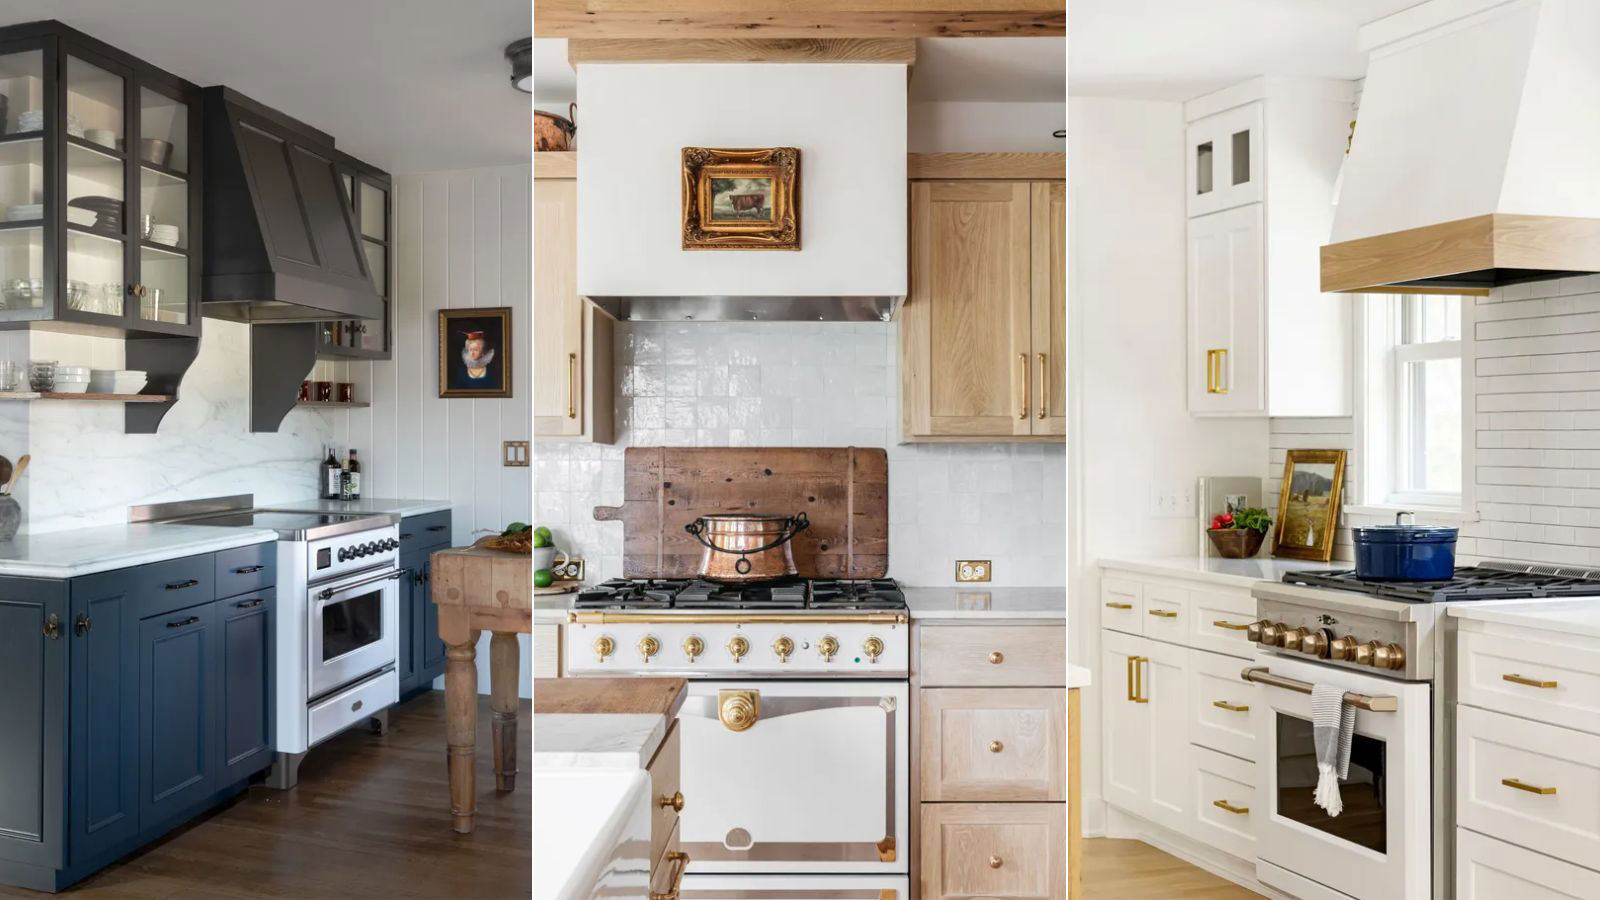 What colors work best in a kitchen with white appliances? Interior ...